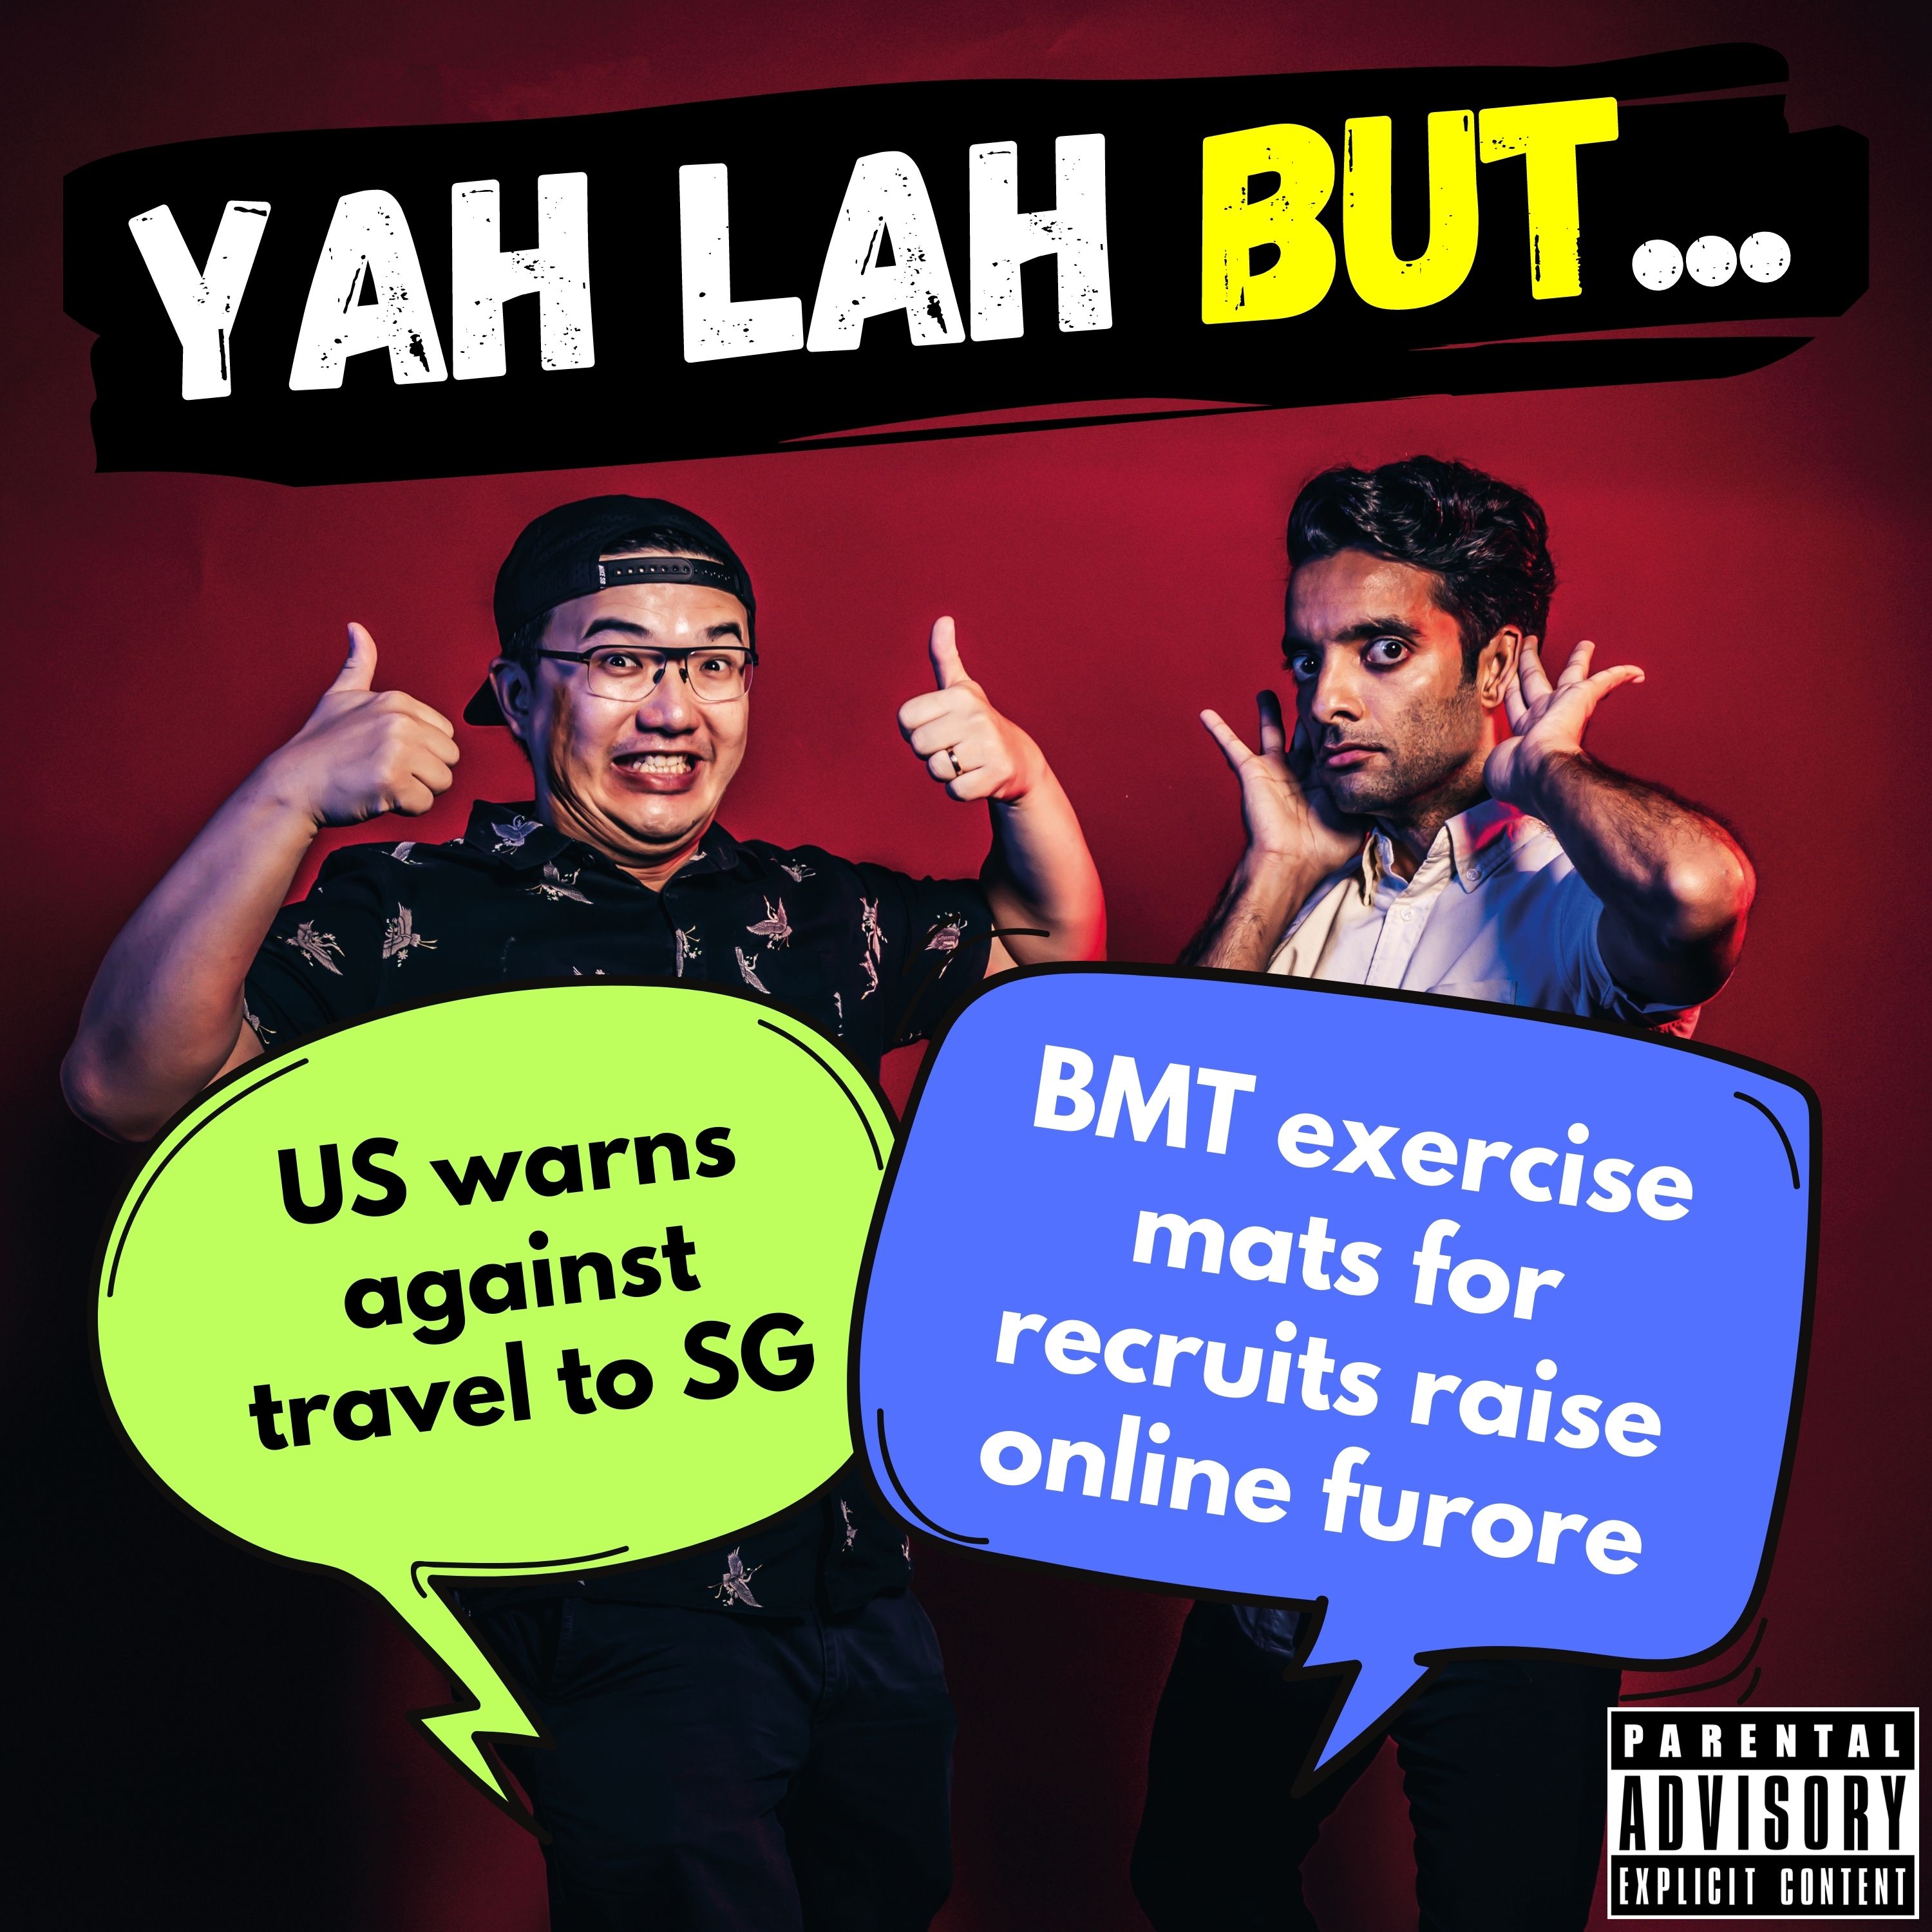 #257 - US warns against travel to SG & BMT exercise mats raise online furore